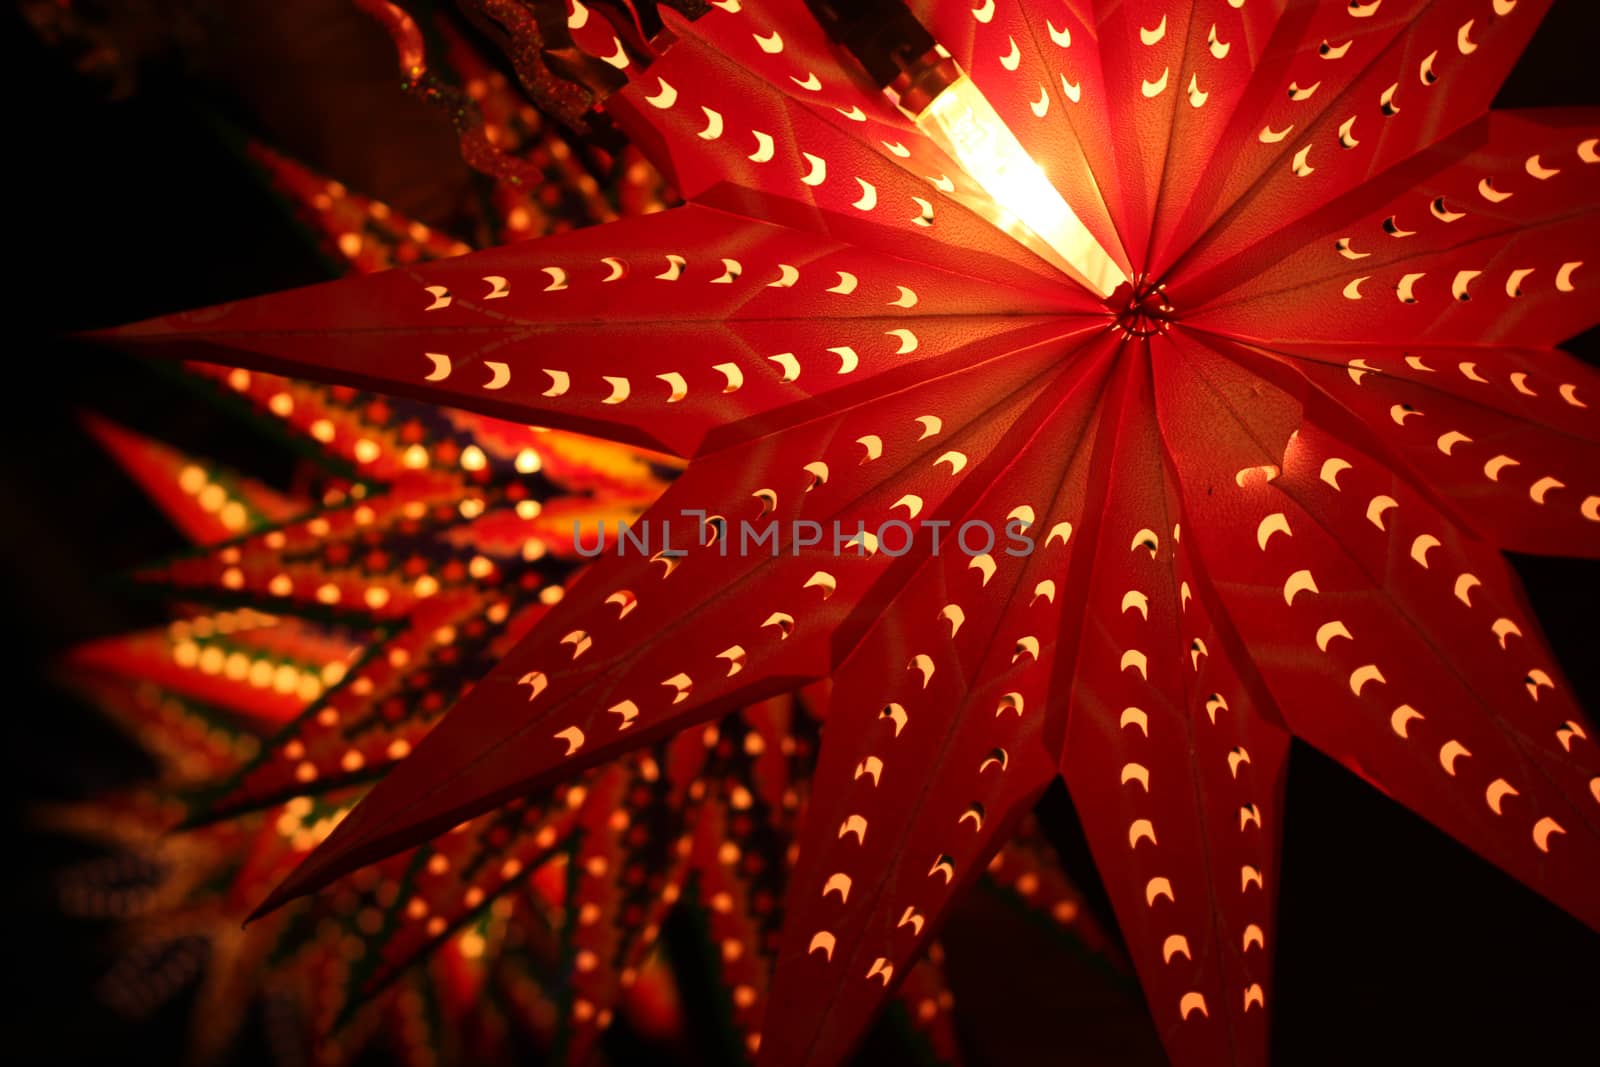 Beautiful traditional lanterns lit on the occassion of Diwali fe by thefinalmiracle